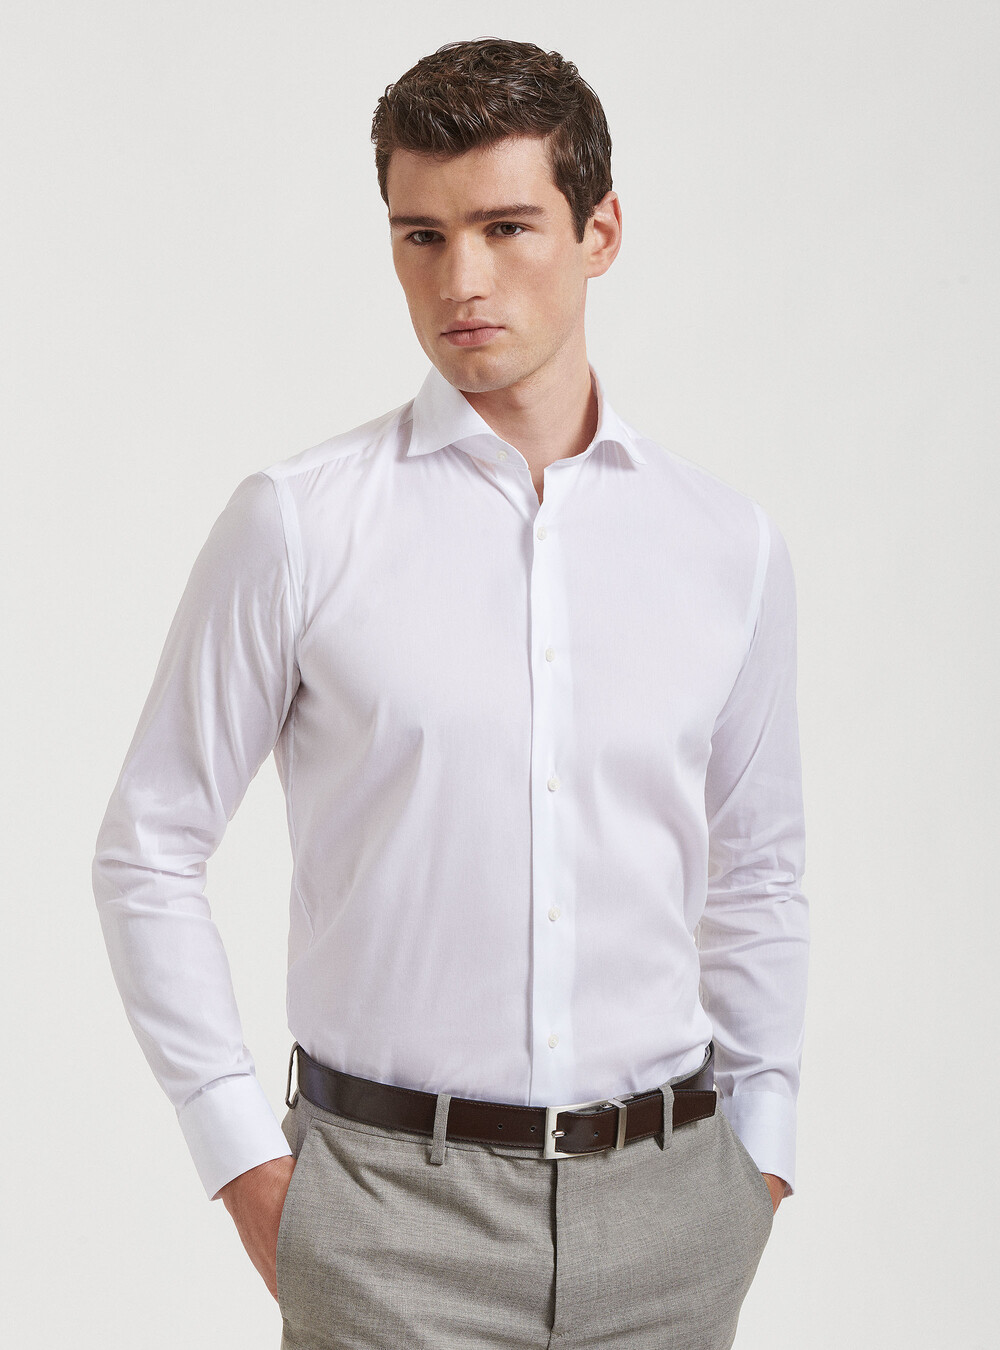 Men's Gutteridge Shirts | Elegant and casual. Discover them now